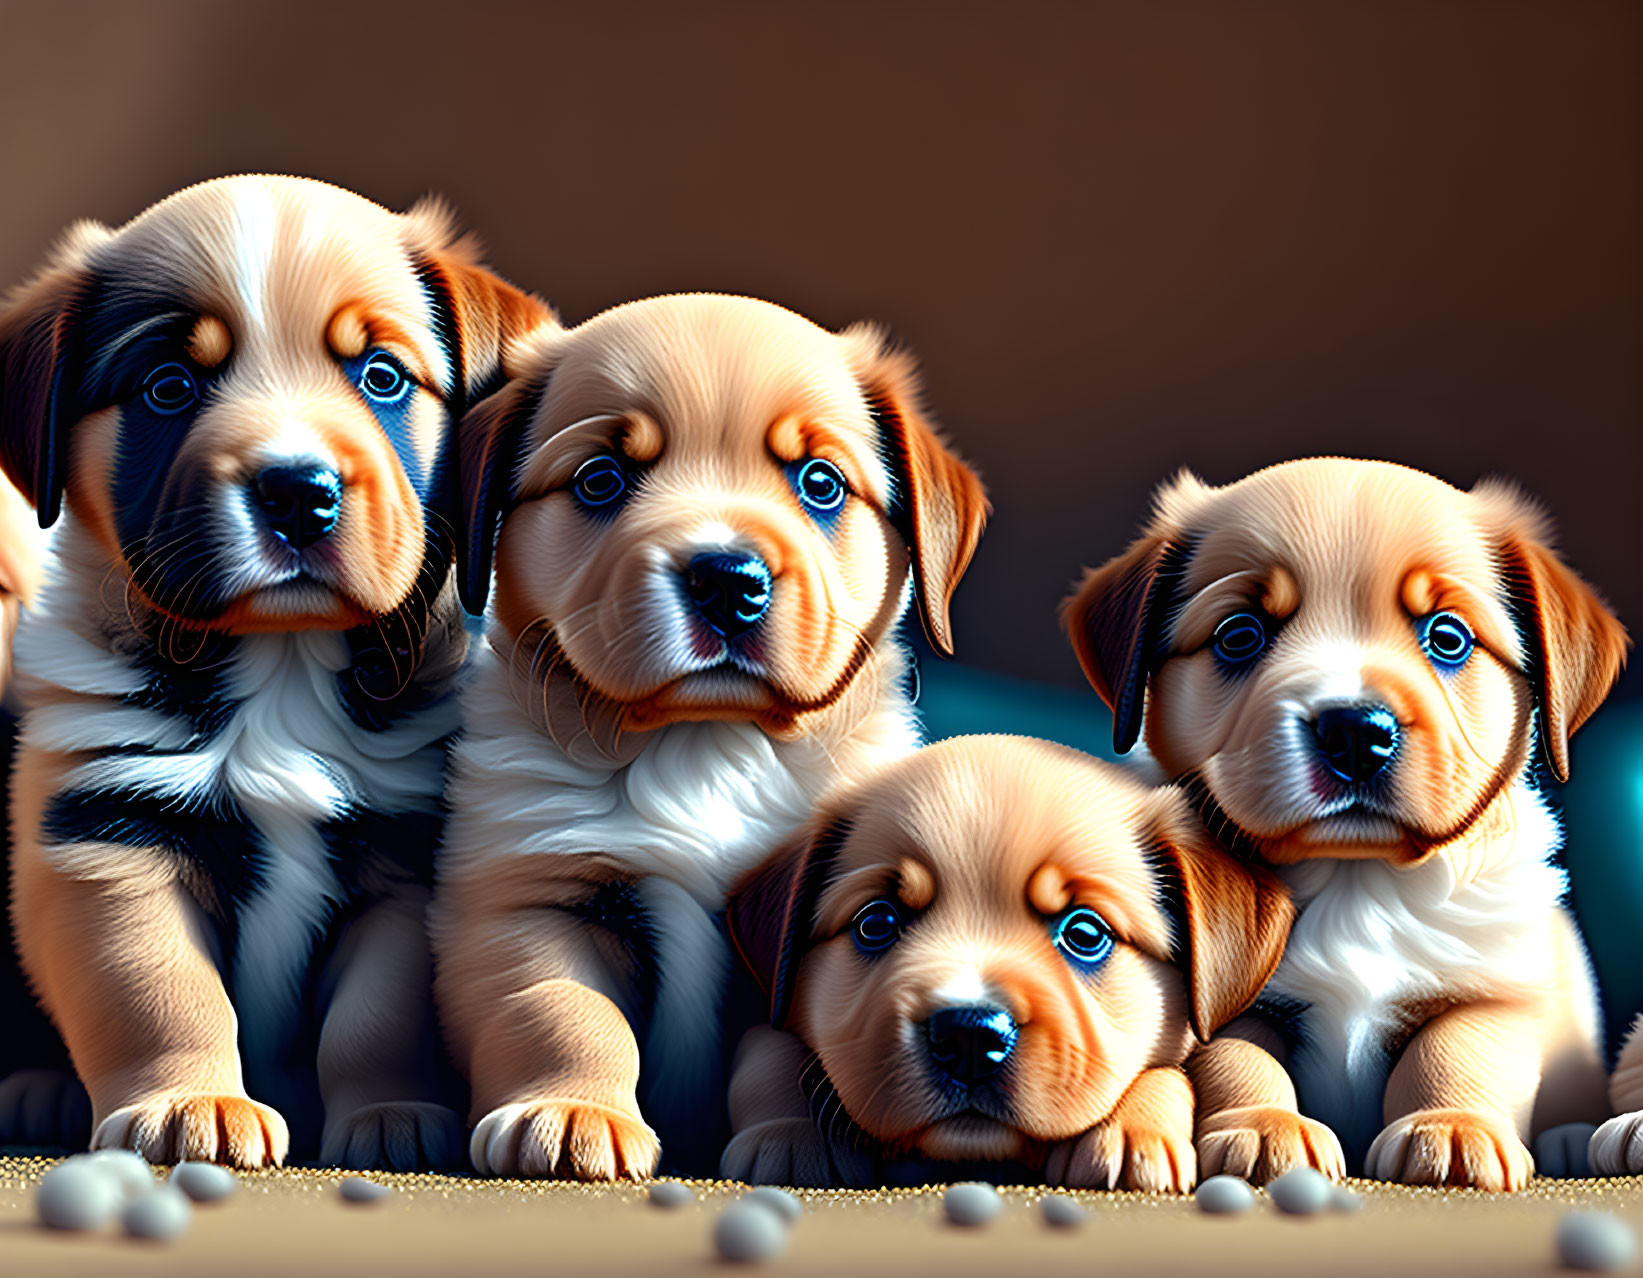 Four glossy fur puppies sitting against warm background